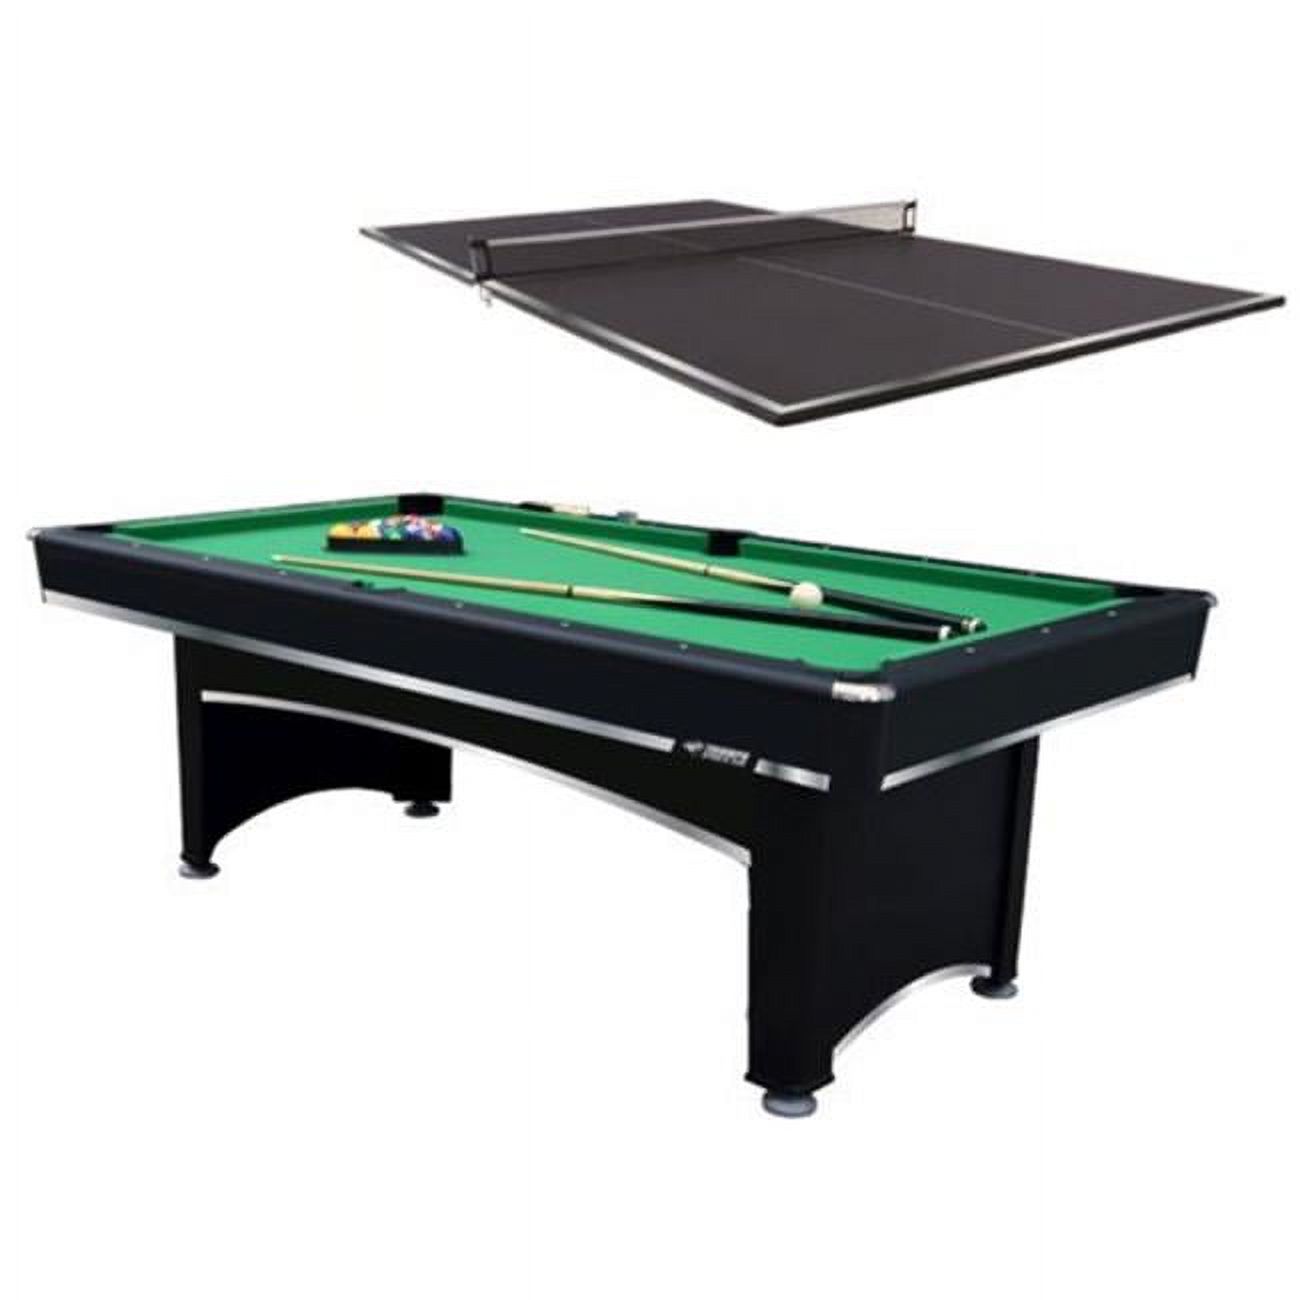 Triumph Sports USA 45-6102 84 in. Arcade  Billiard Table with Table Tennis Top - image 1 of 18